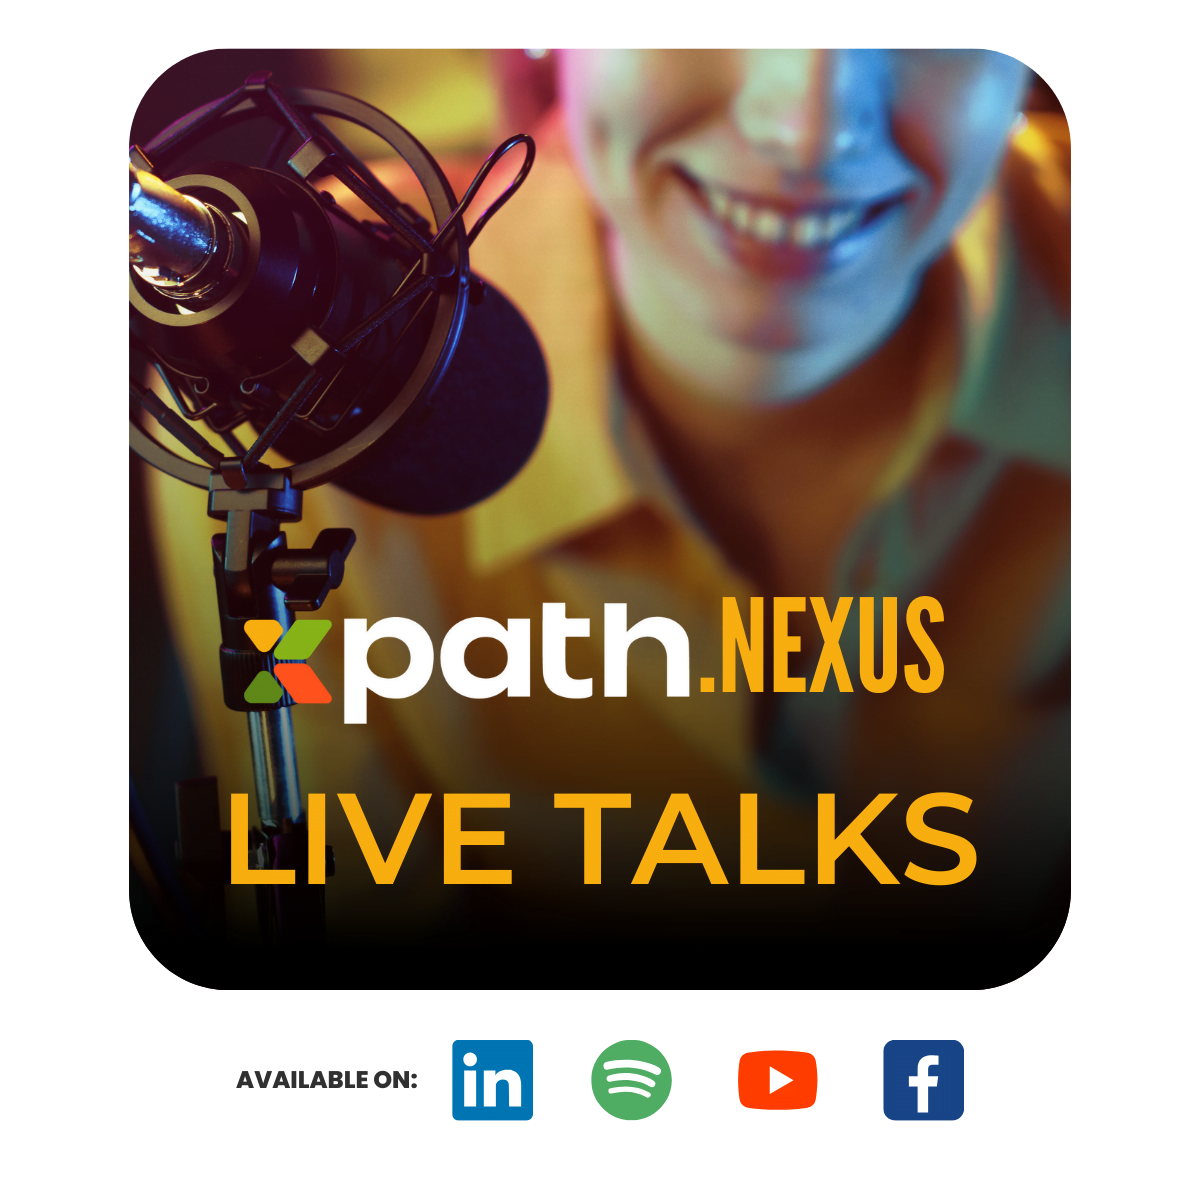 Be one of our expert speakers on xpath.NEXUS